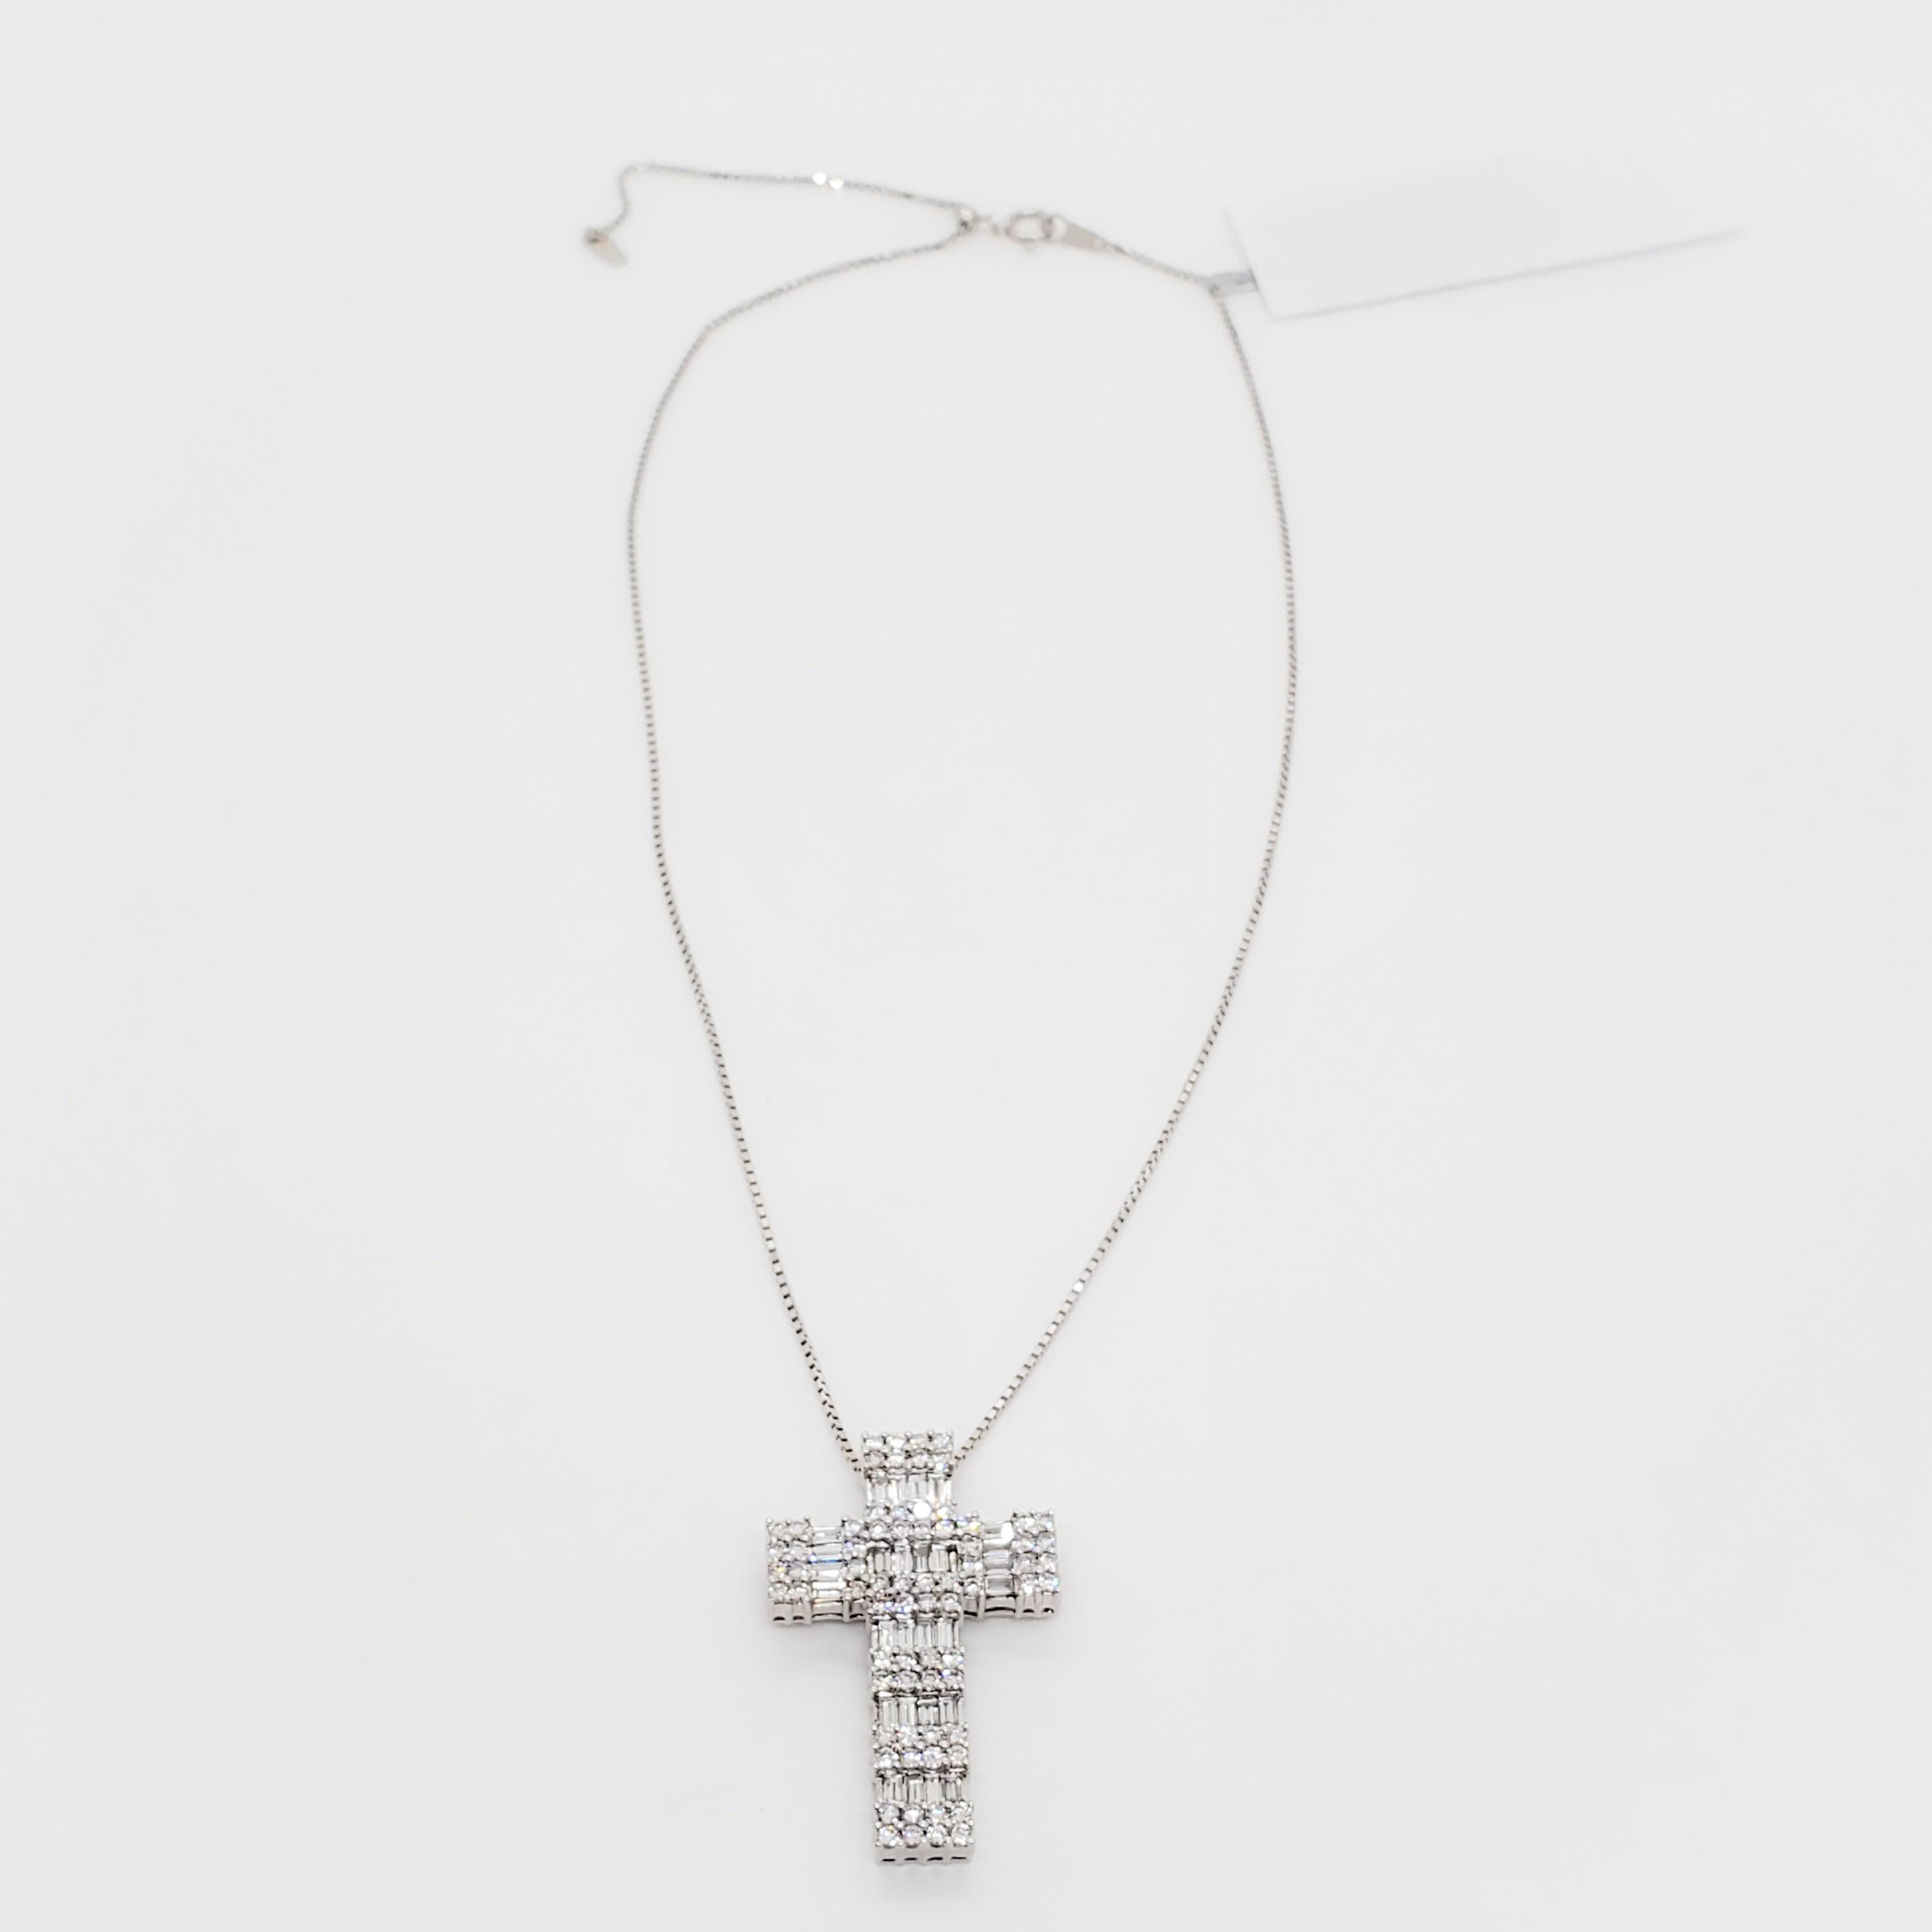 Amazing estate cross pendant necklace showcasing 2.95 cts. of good quality white diamonds in a handmade mounting with a sturdy platinum chain. Length is 18